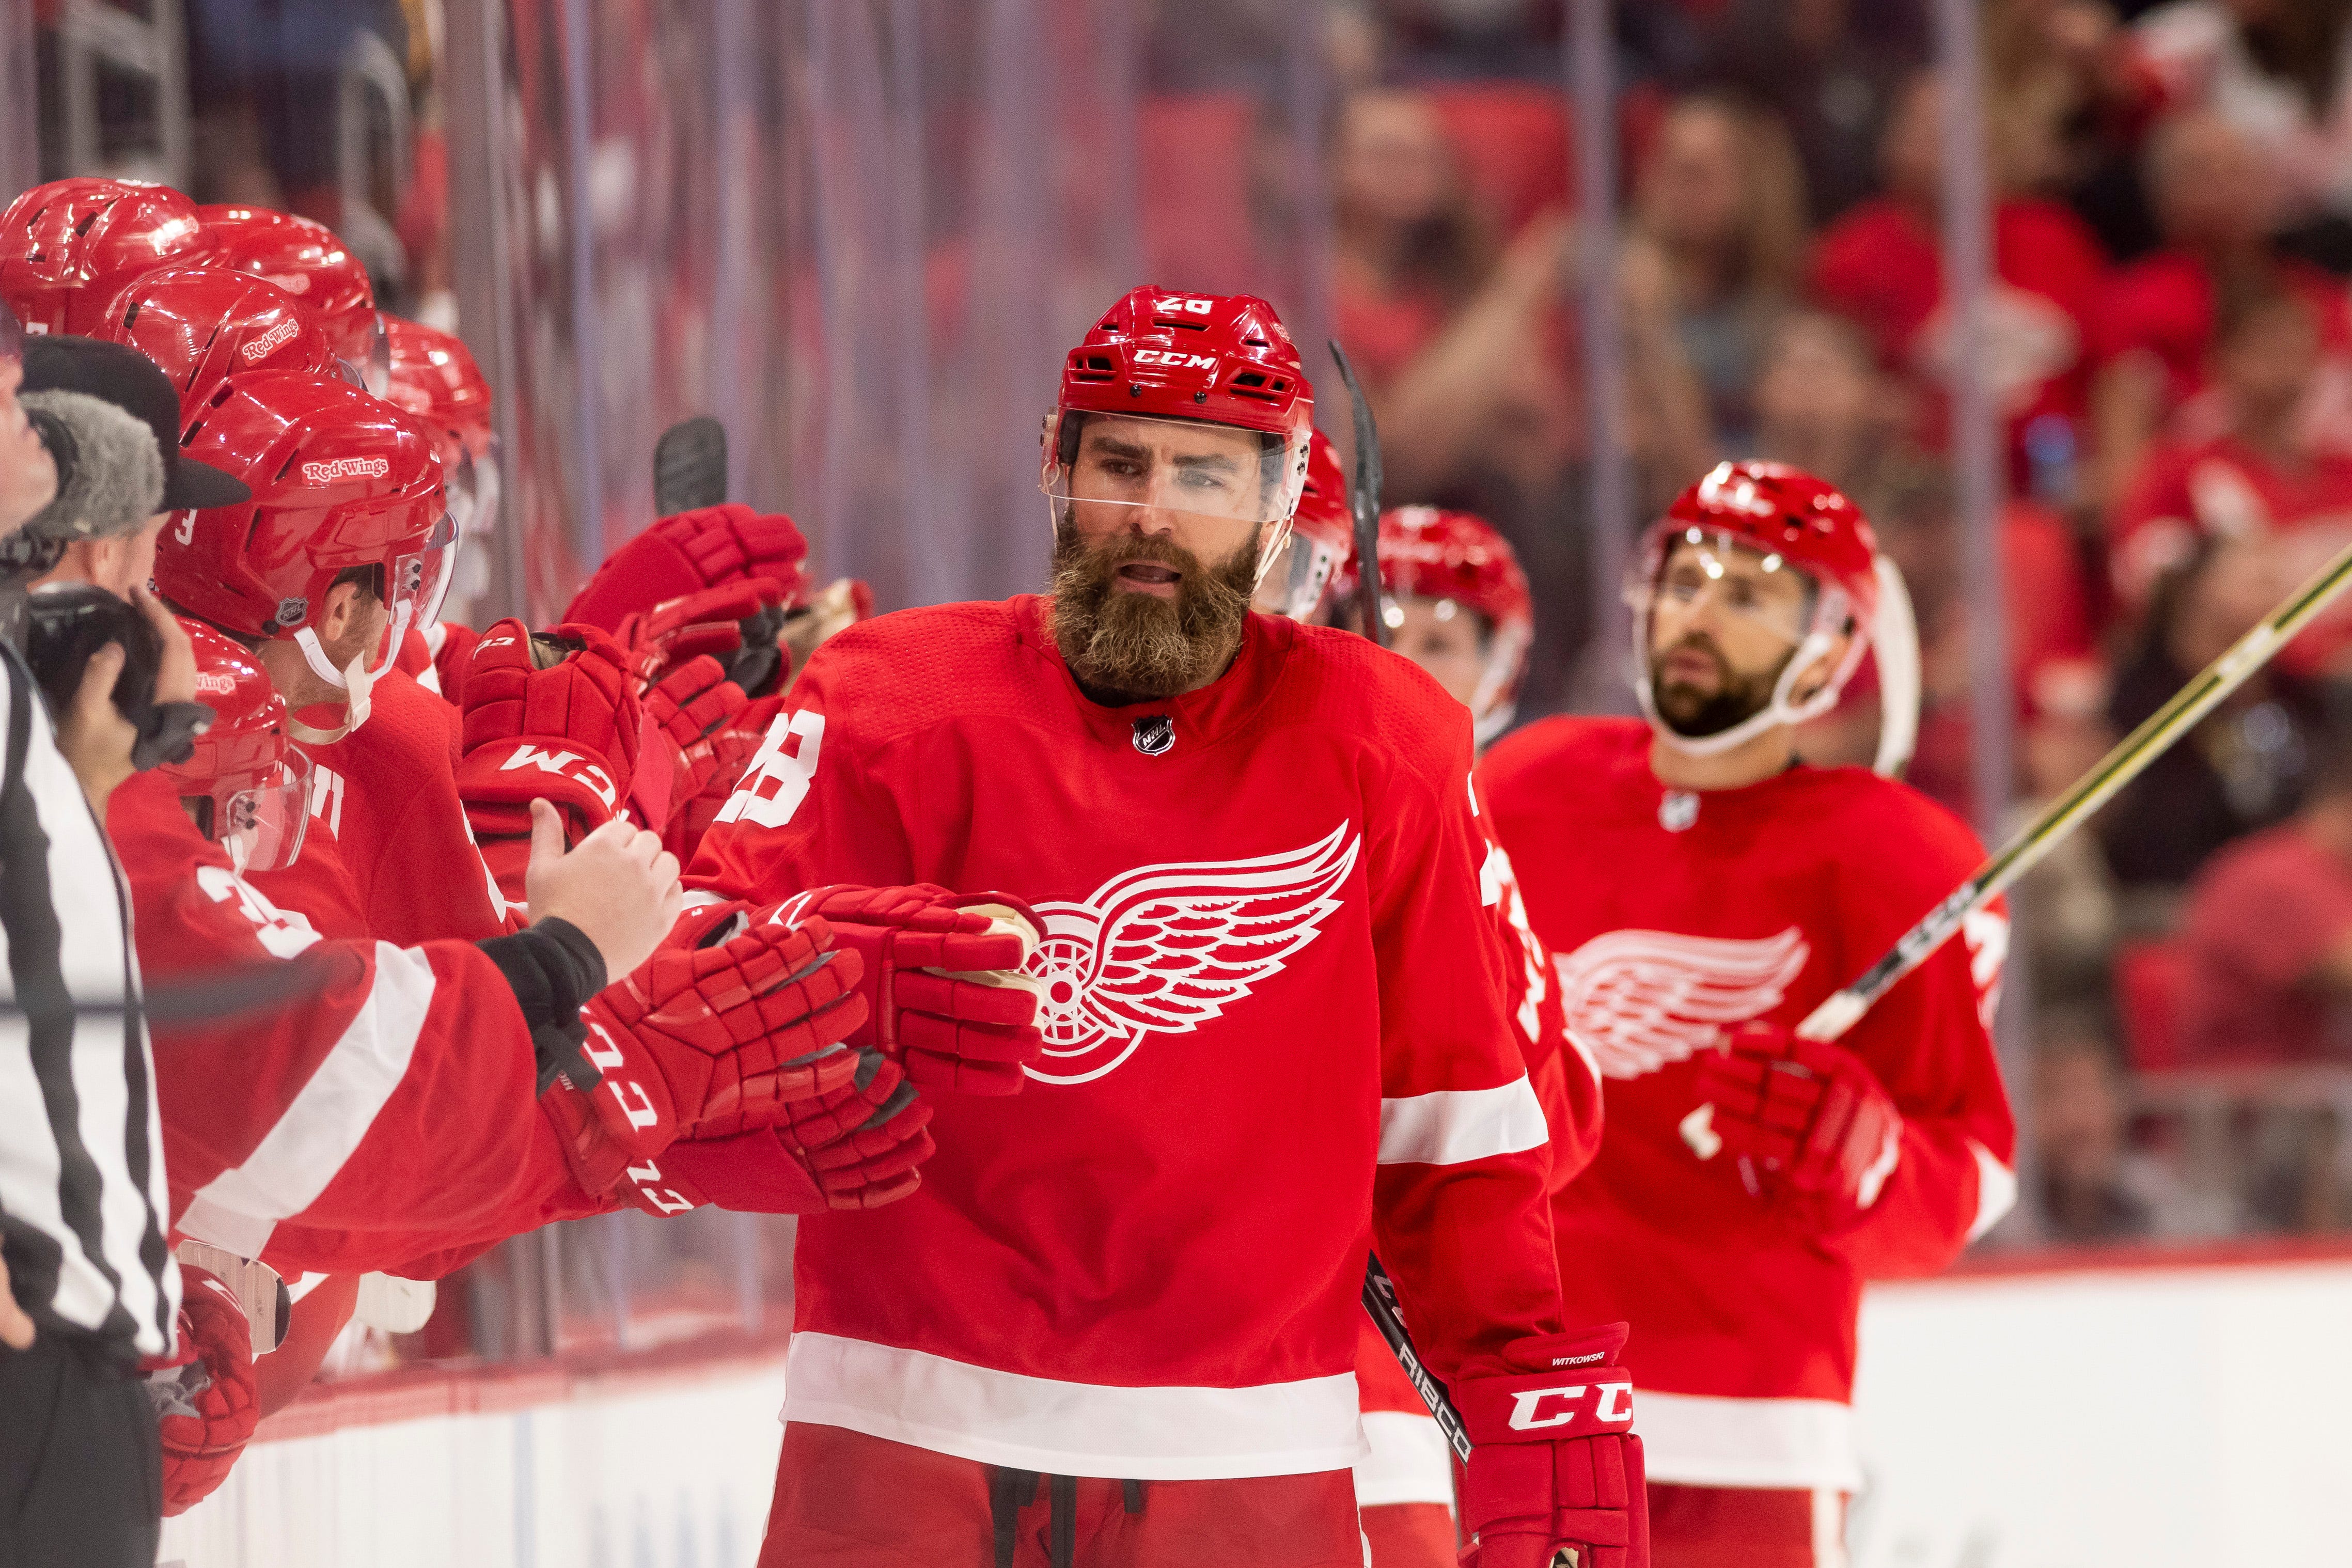 38. Luke Witkowski, defenseman. Has been the Wings’ resident policeman the last two seasons, protecting teammates with his willigness to fight. But Witkowski’s an unrestricted free agent, and the Wings might be looking to replace him with younger options.